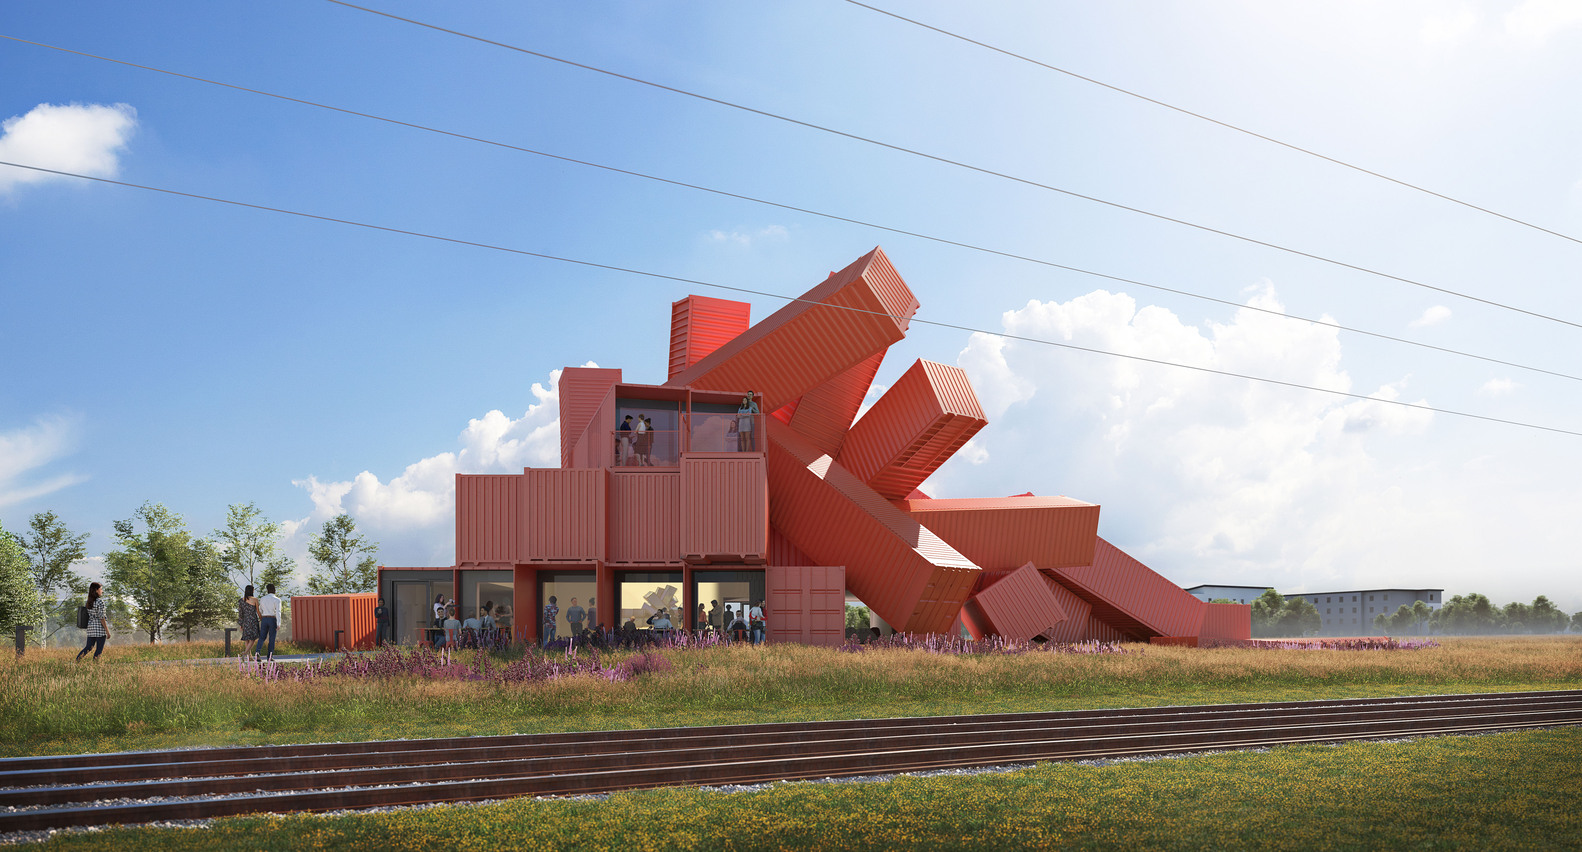 UK Artist Designs Sculptural Building From Shipping Containers